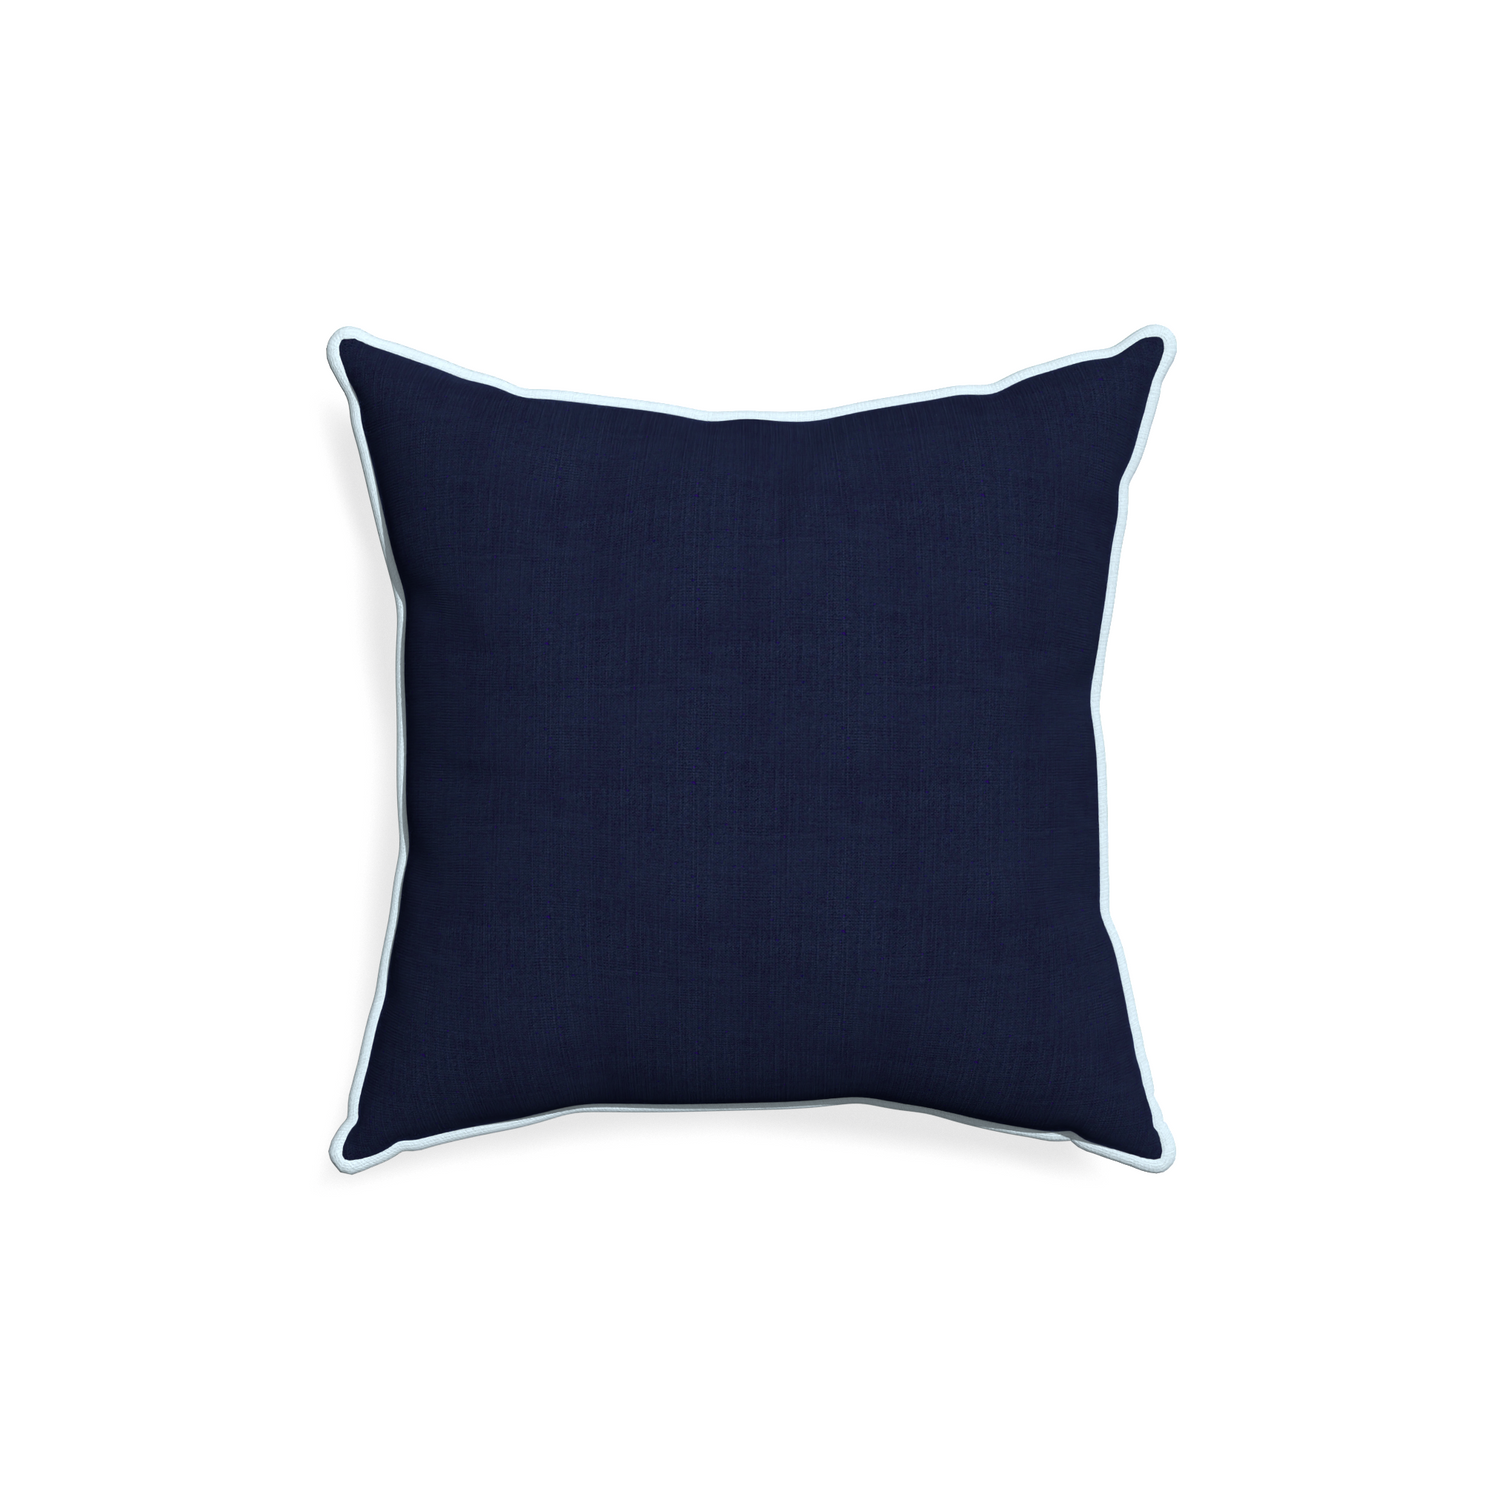 18-square midnight custom navy bluepillow with powder piping on white background